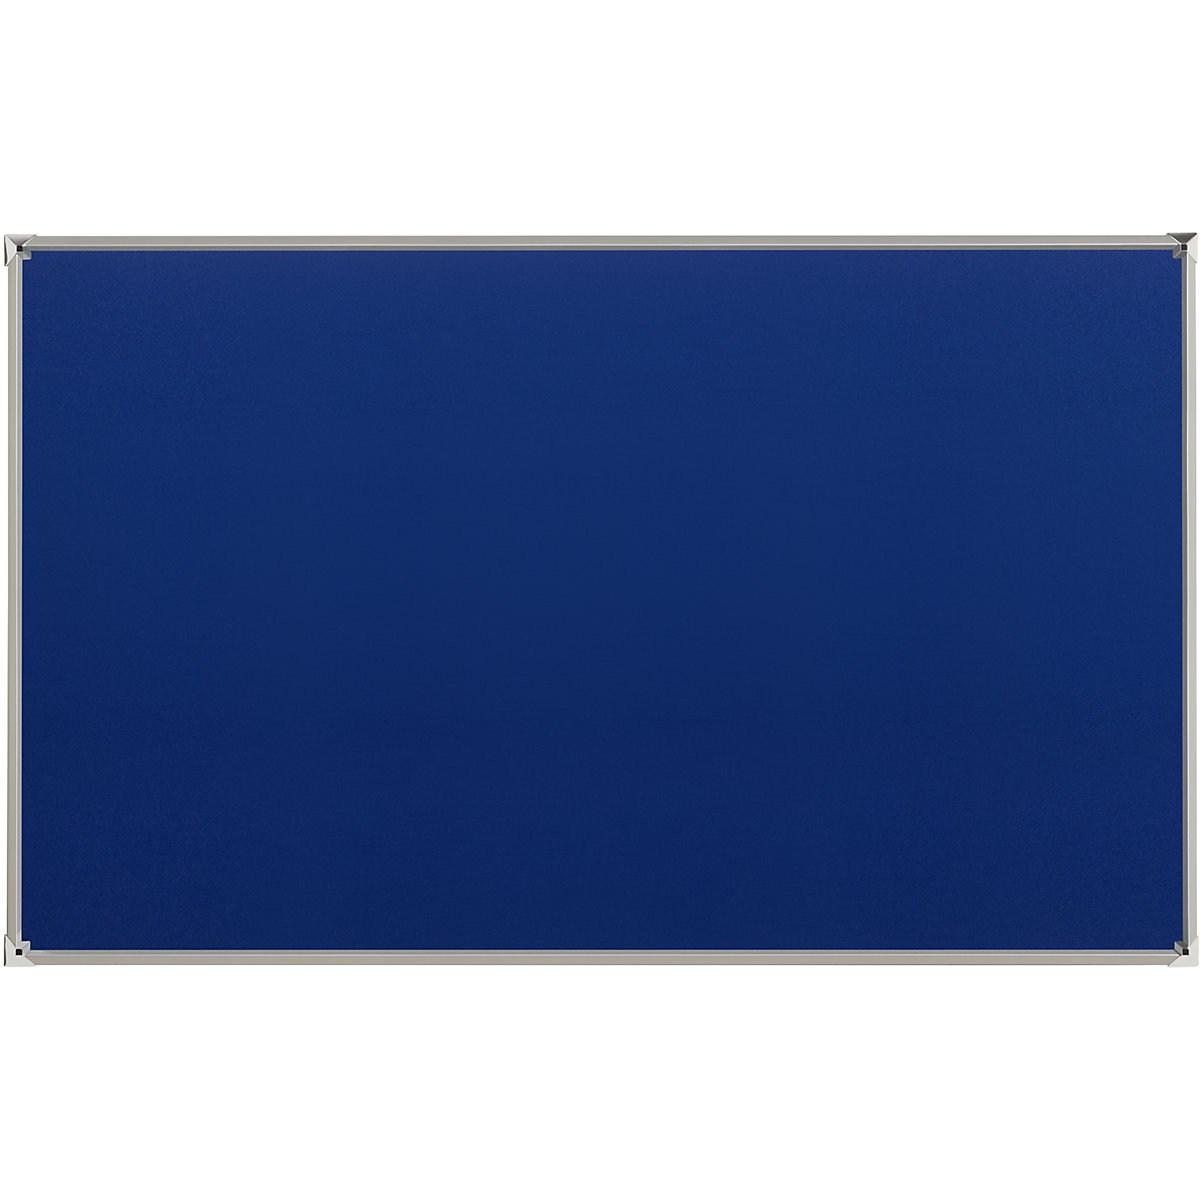 Pinboard with aluminium frame – eurokraft pro, fabric covering, blue, WxH 1800 x 1200 mm-3